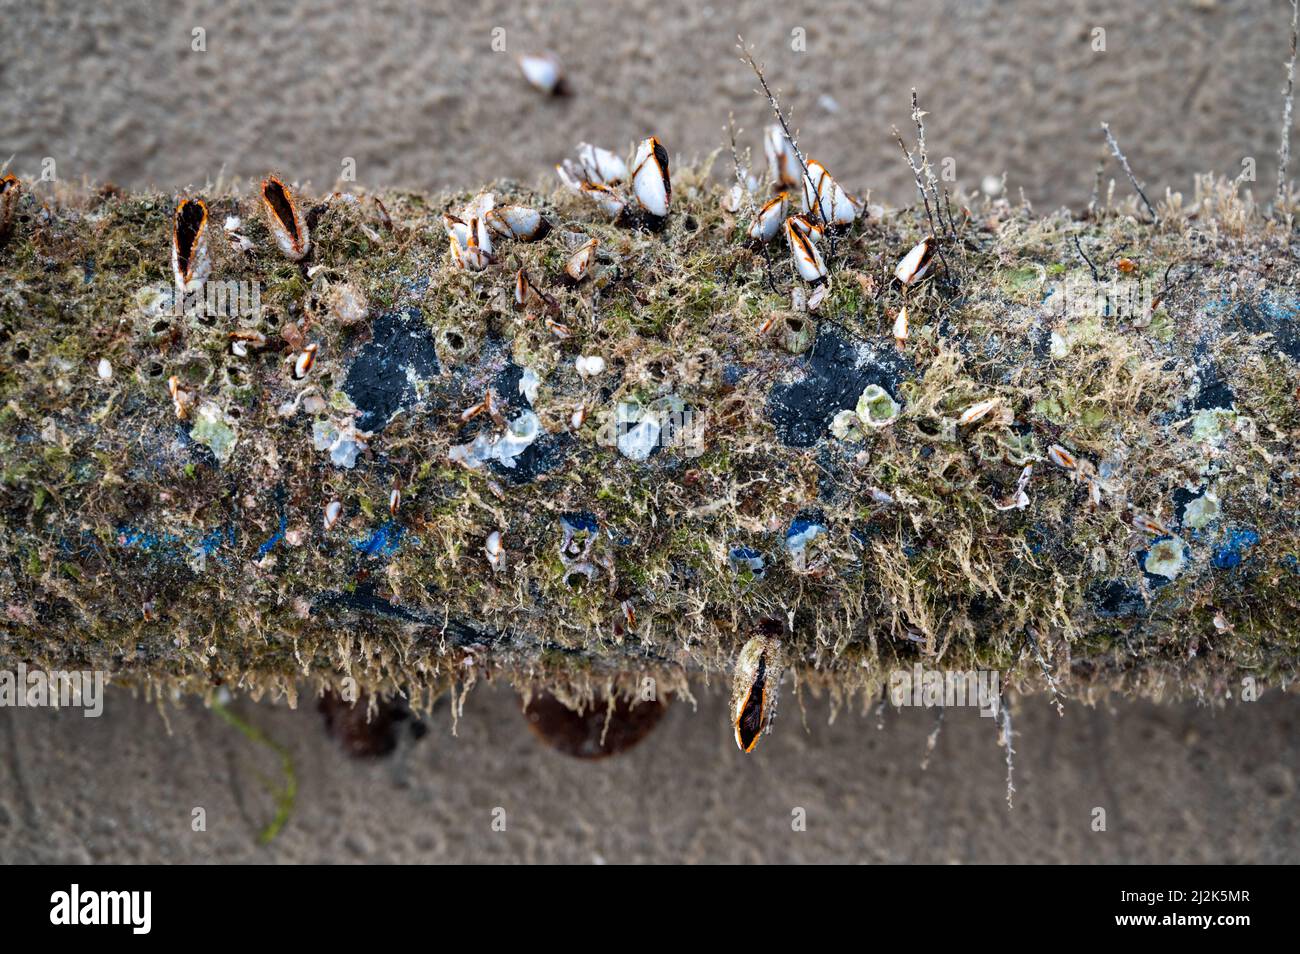 The shell named goose barnacles or gooseneck barnacle Lepas anserifera Linnea is commonly seen at the surface of driftwood on the seashore of pacific Stock Photo